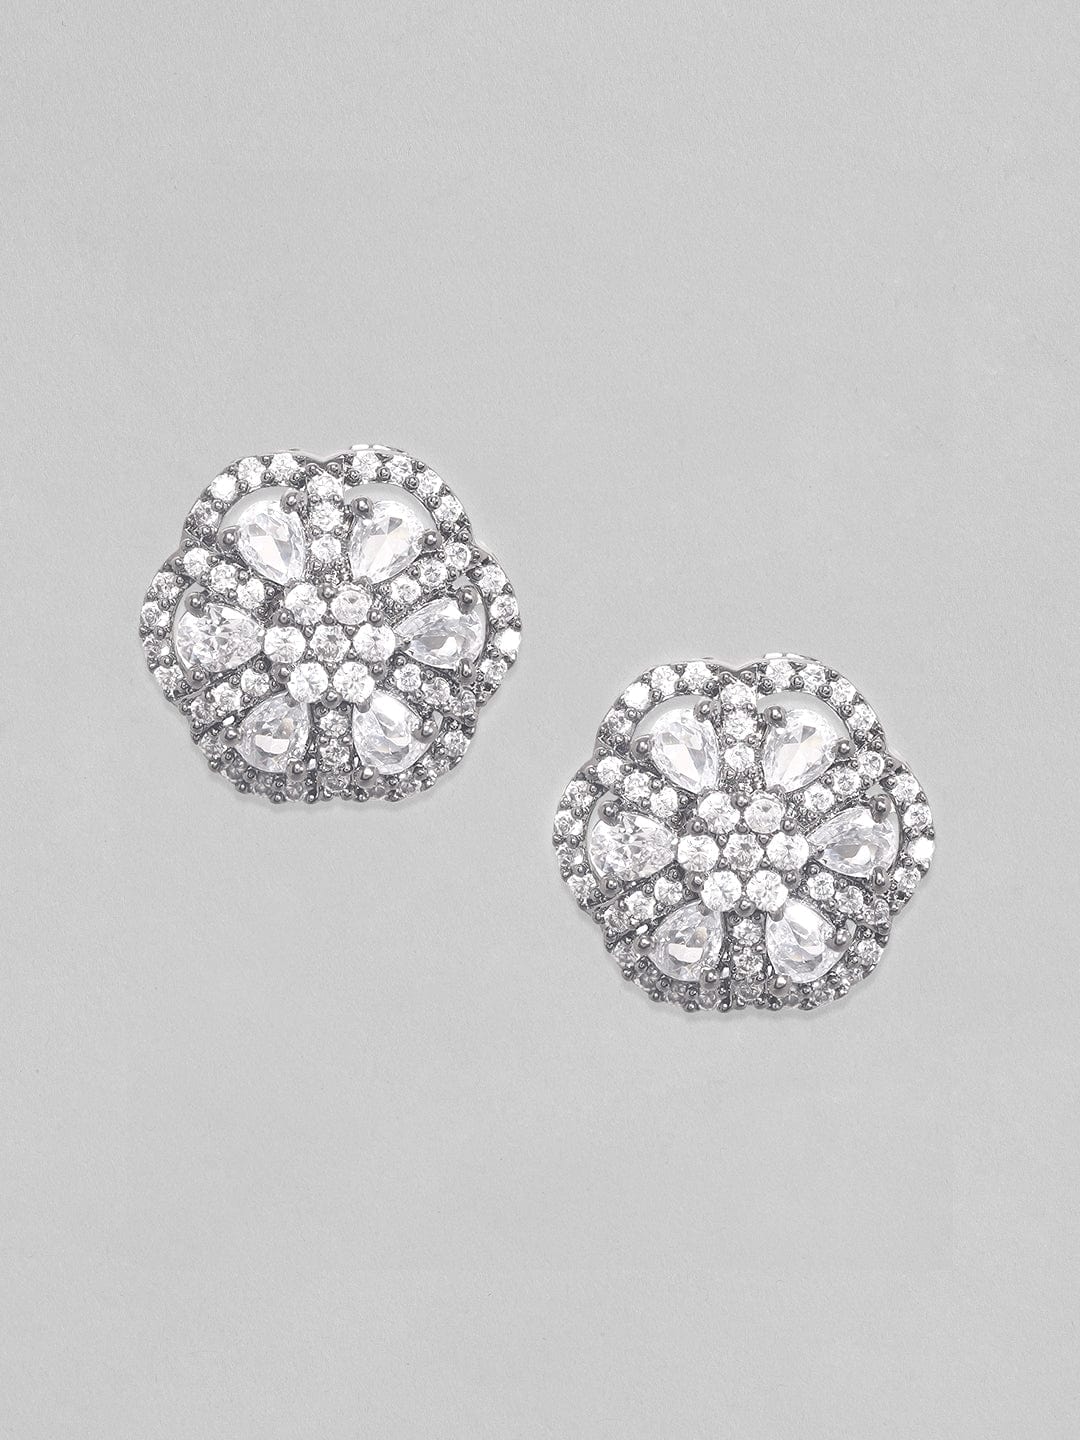 Shop Crystal Stud Earrings at PAVOI | Affordable Everyday Jewelry